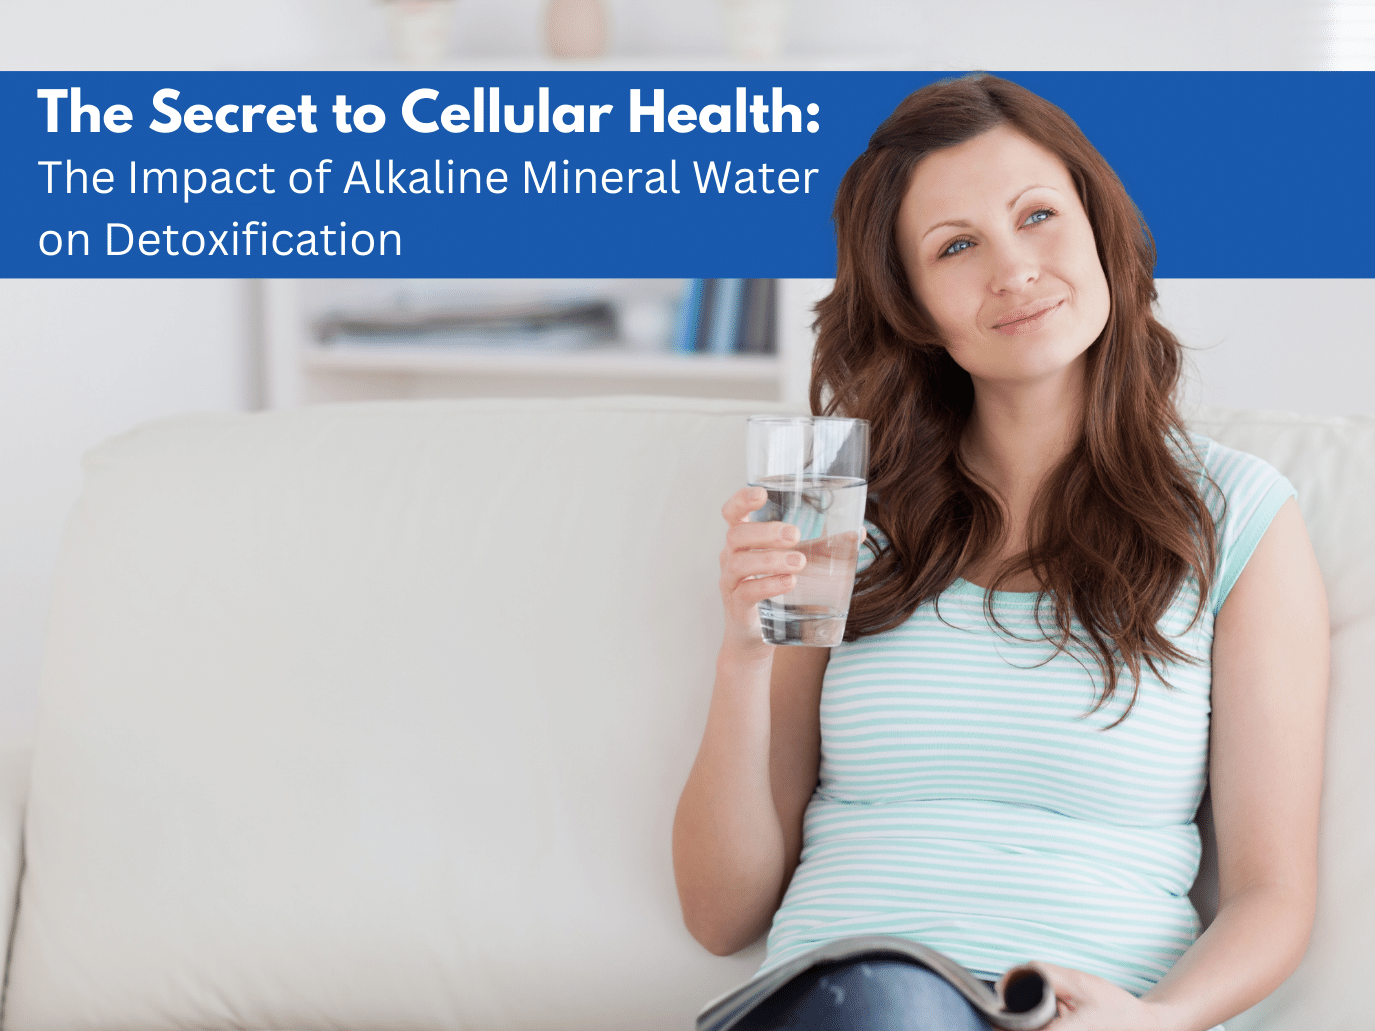 The Impact of Alkaline Mineral Water on Detoxification